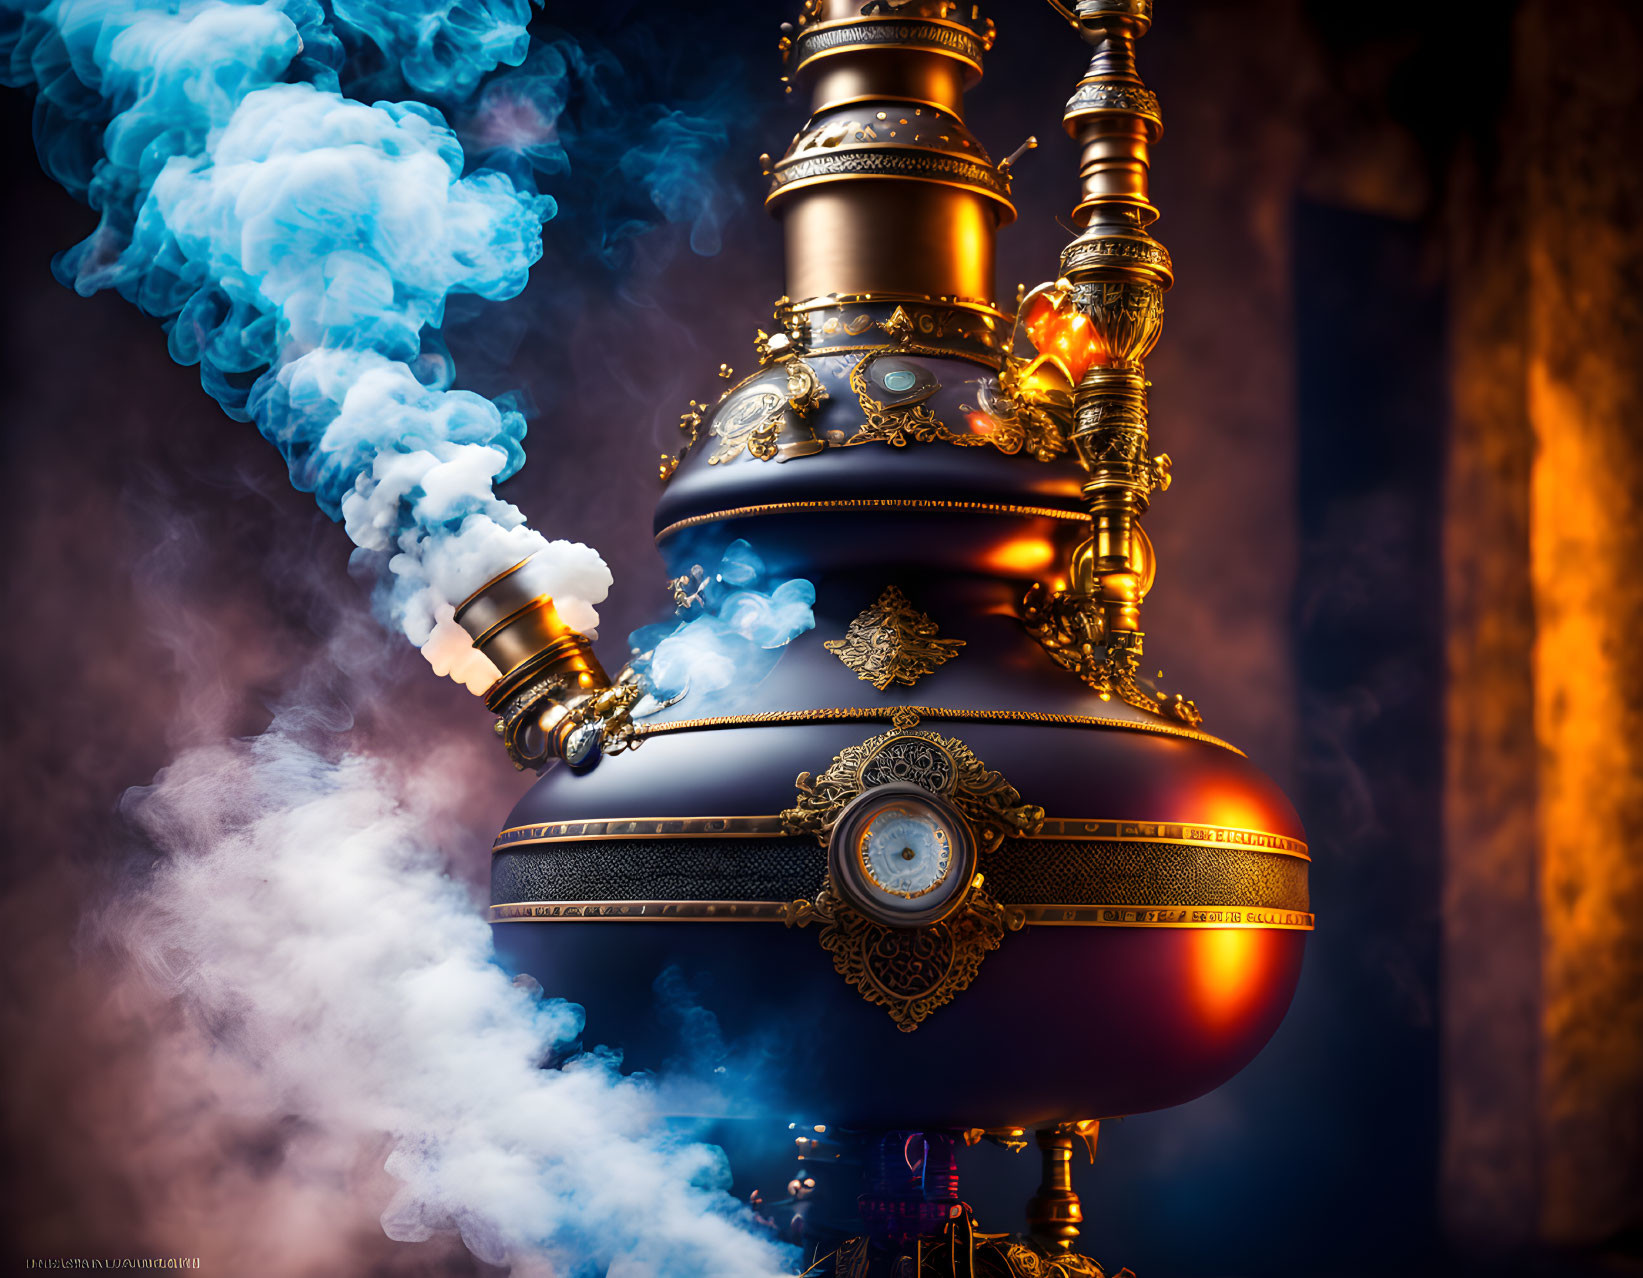 Steampunk apparatus with smoke, gold accents, clock, blue and burgundy body